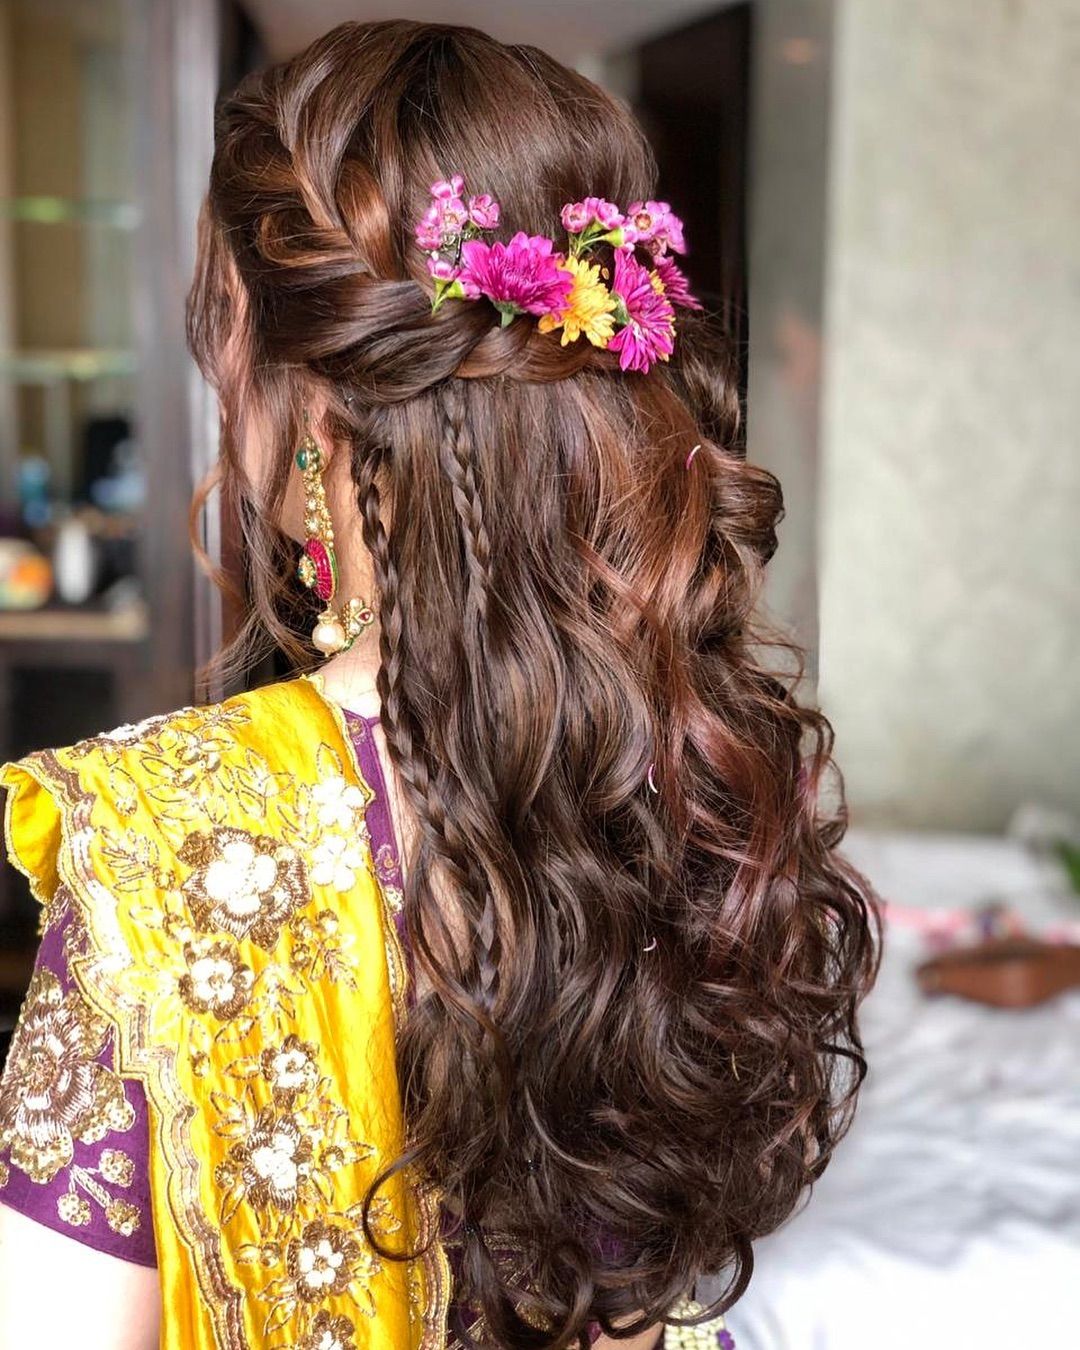 29 Half-Up, Half-Down Wedding Hairstyles That Offer the Best of Both Worlds  | Bridesmade hair, Half bun hairstyles, Wedding hairstyles half up half down